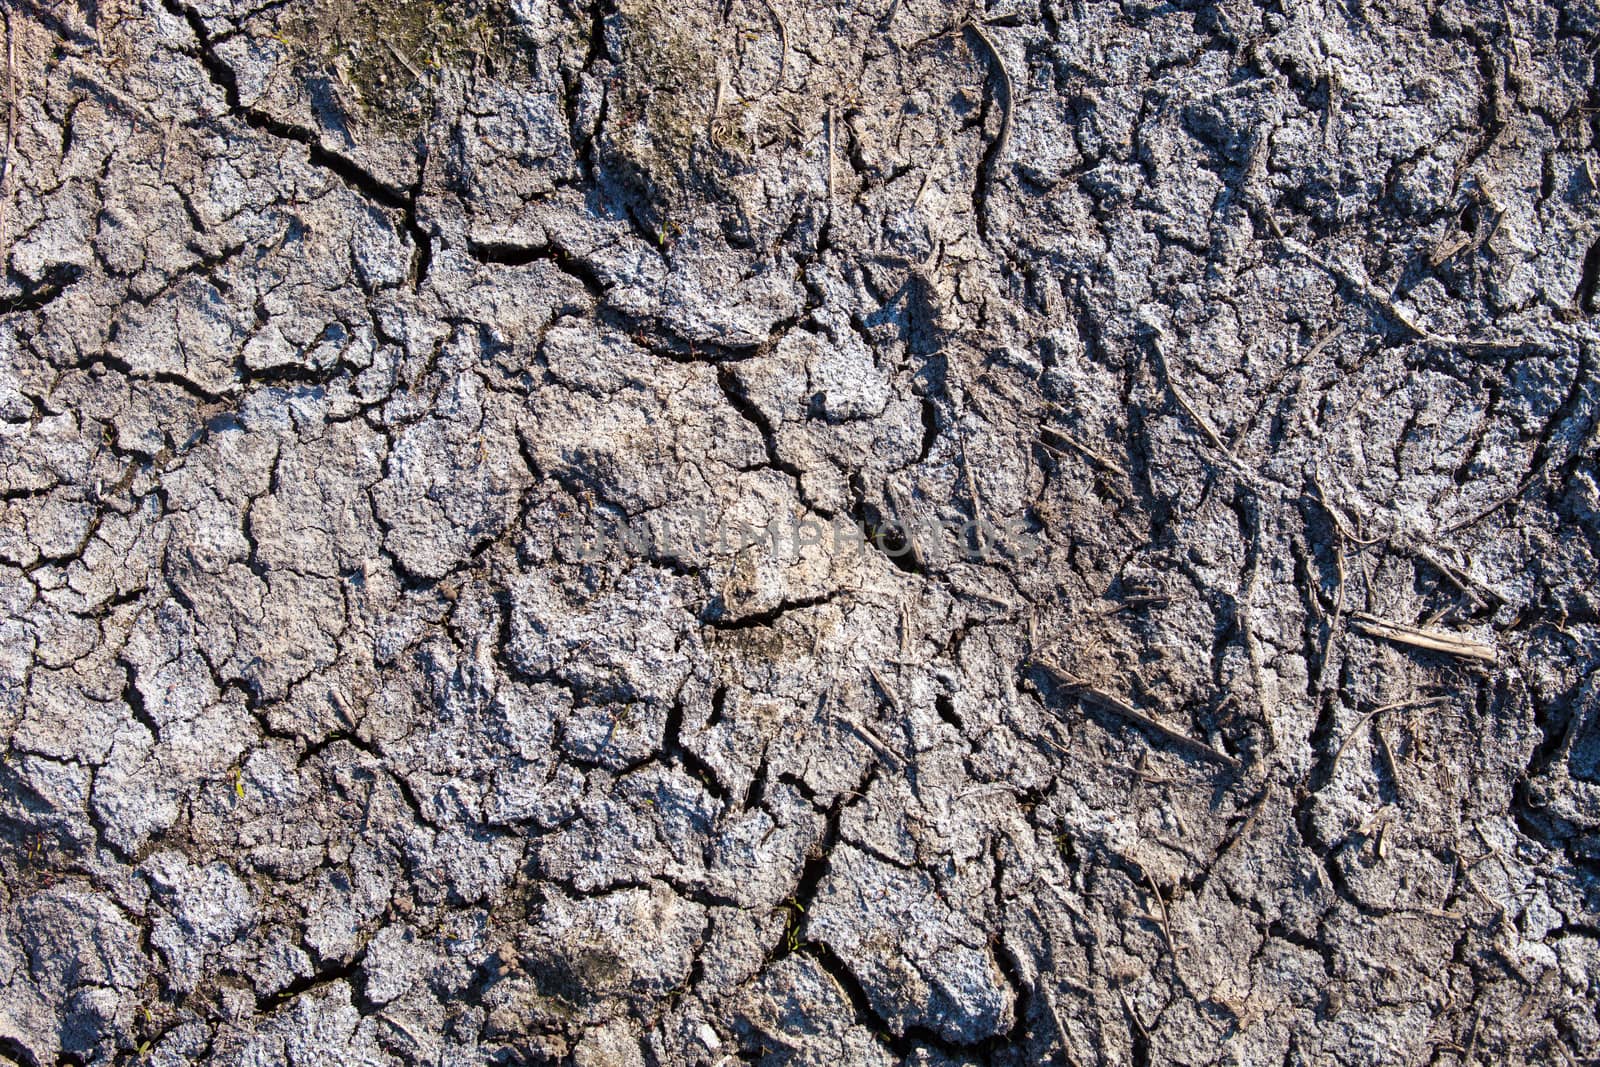 Dried-up mud surface by rootstocks